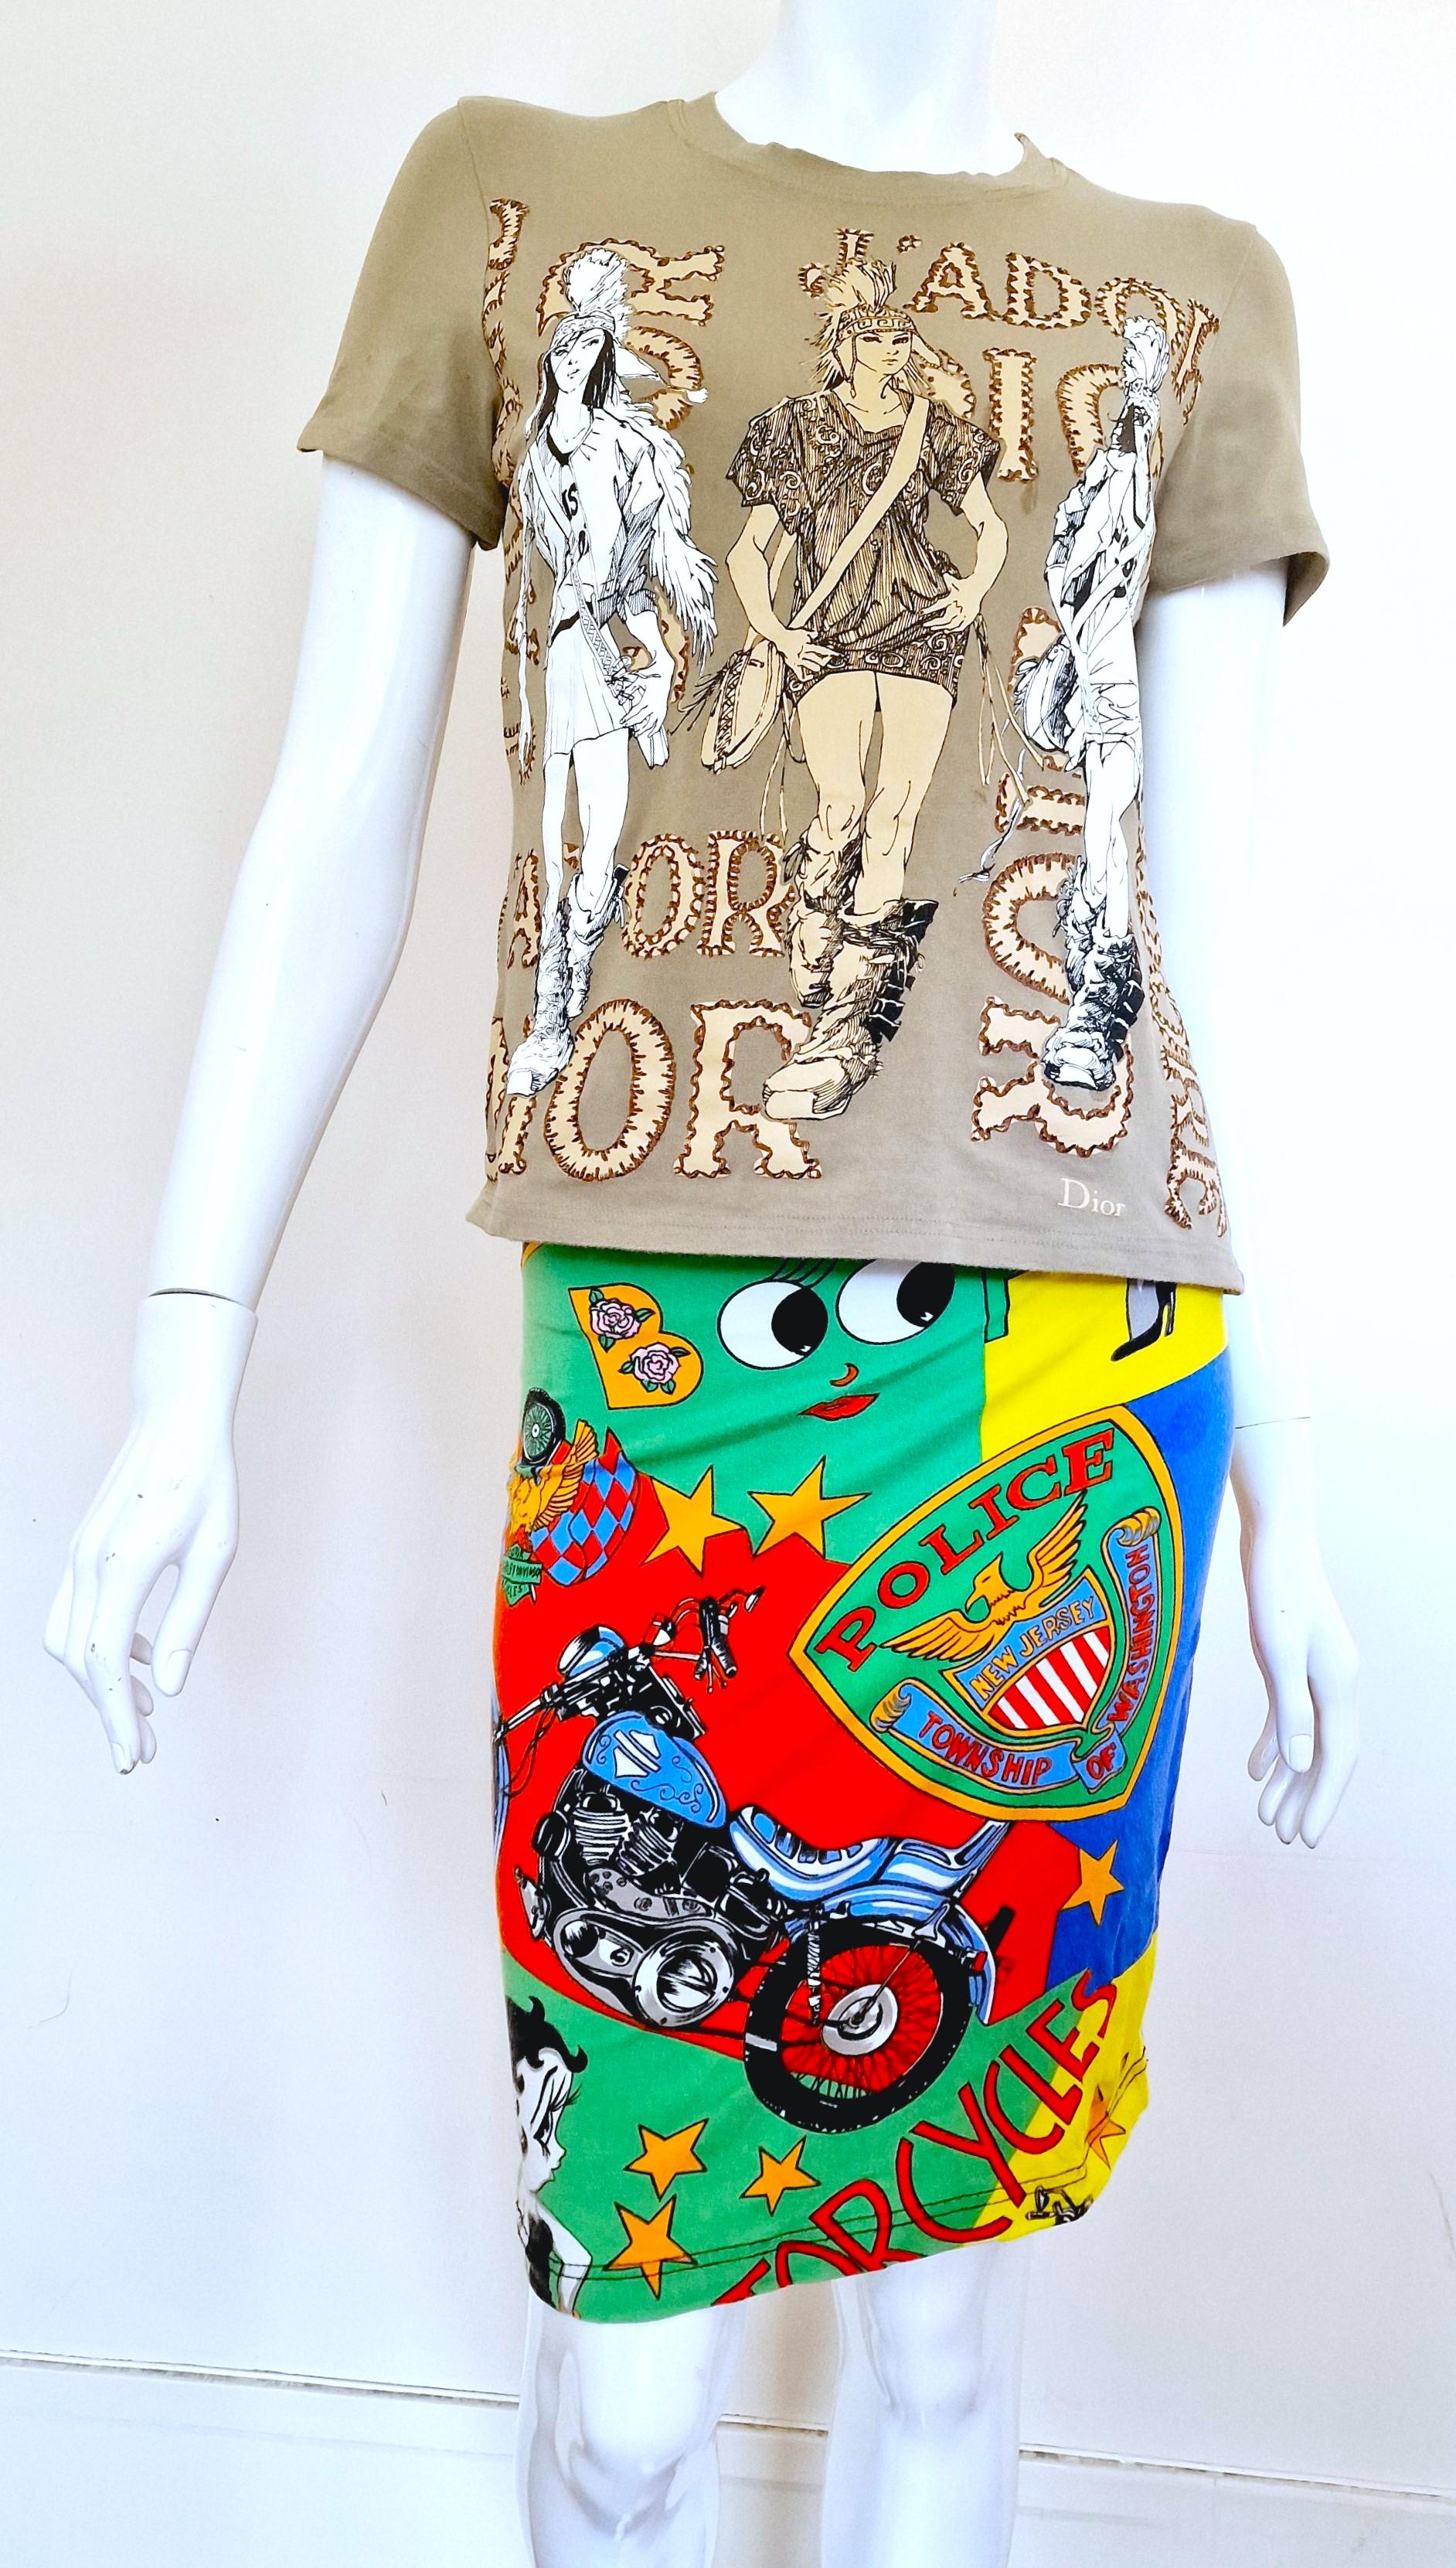 Betty boop skirt by Gianni Versace!
Go back to the 90s!

Pattern: 
Betty Boop
Stars
Motorcycles
Cars
Roses
Pin up symbols
New Jersey logo - Police, Township of Washington

While Kardashian and Miley Cyrus wore the dress and overalls version.

Marked